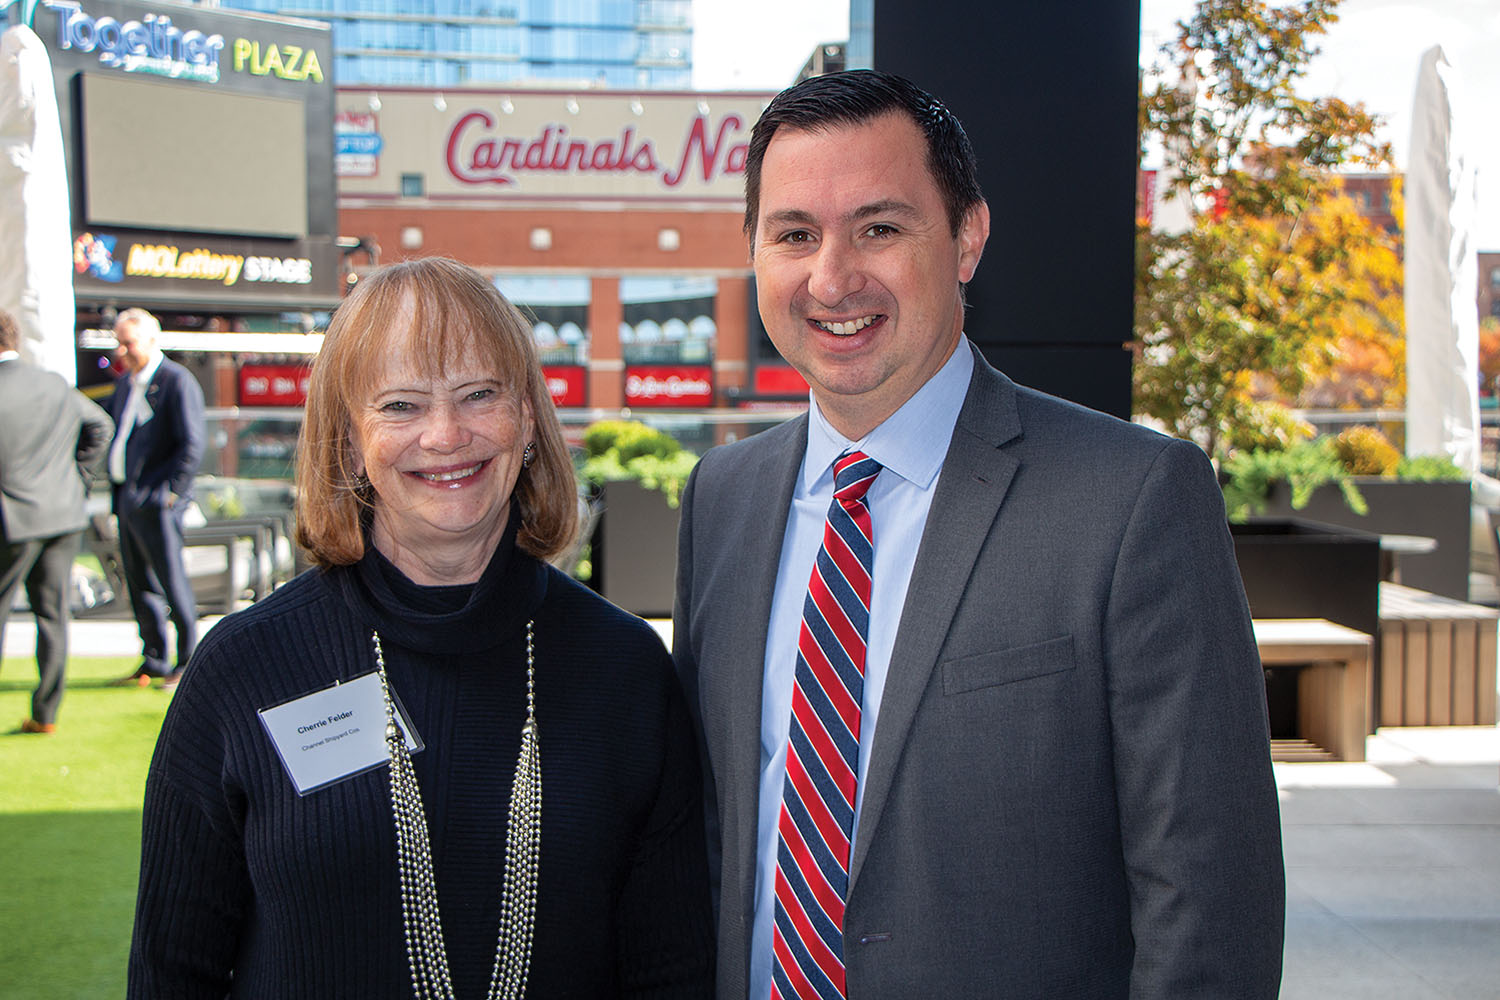 Cherie Felder, vice president of Channel Shipyards, with Nathan Gonzales, editor of the Inside Elections newsletter. Felder introduced Gonzales’ discussion during the Waterways Symposium. (Photo by Nelson Spencer Jr.)